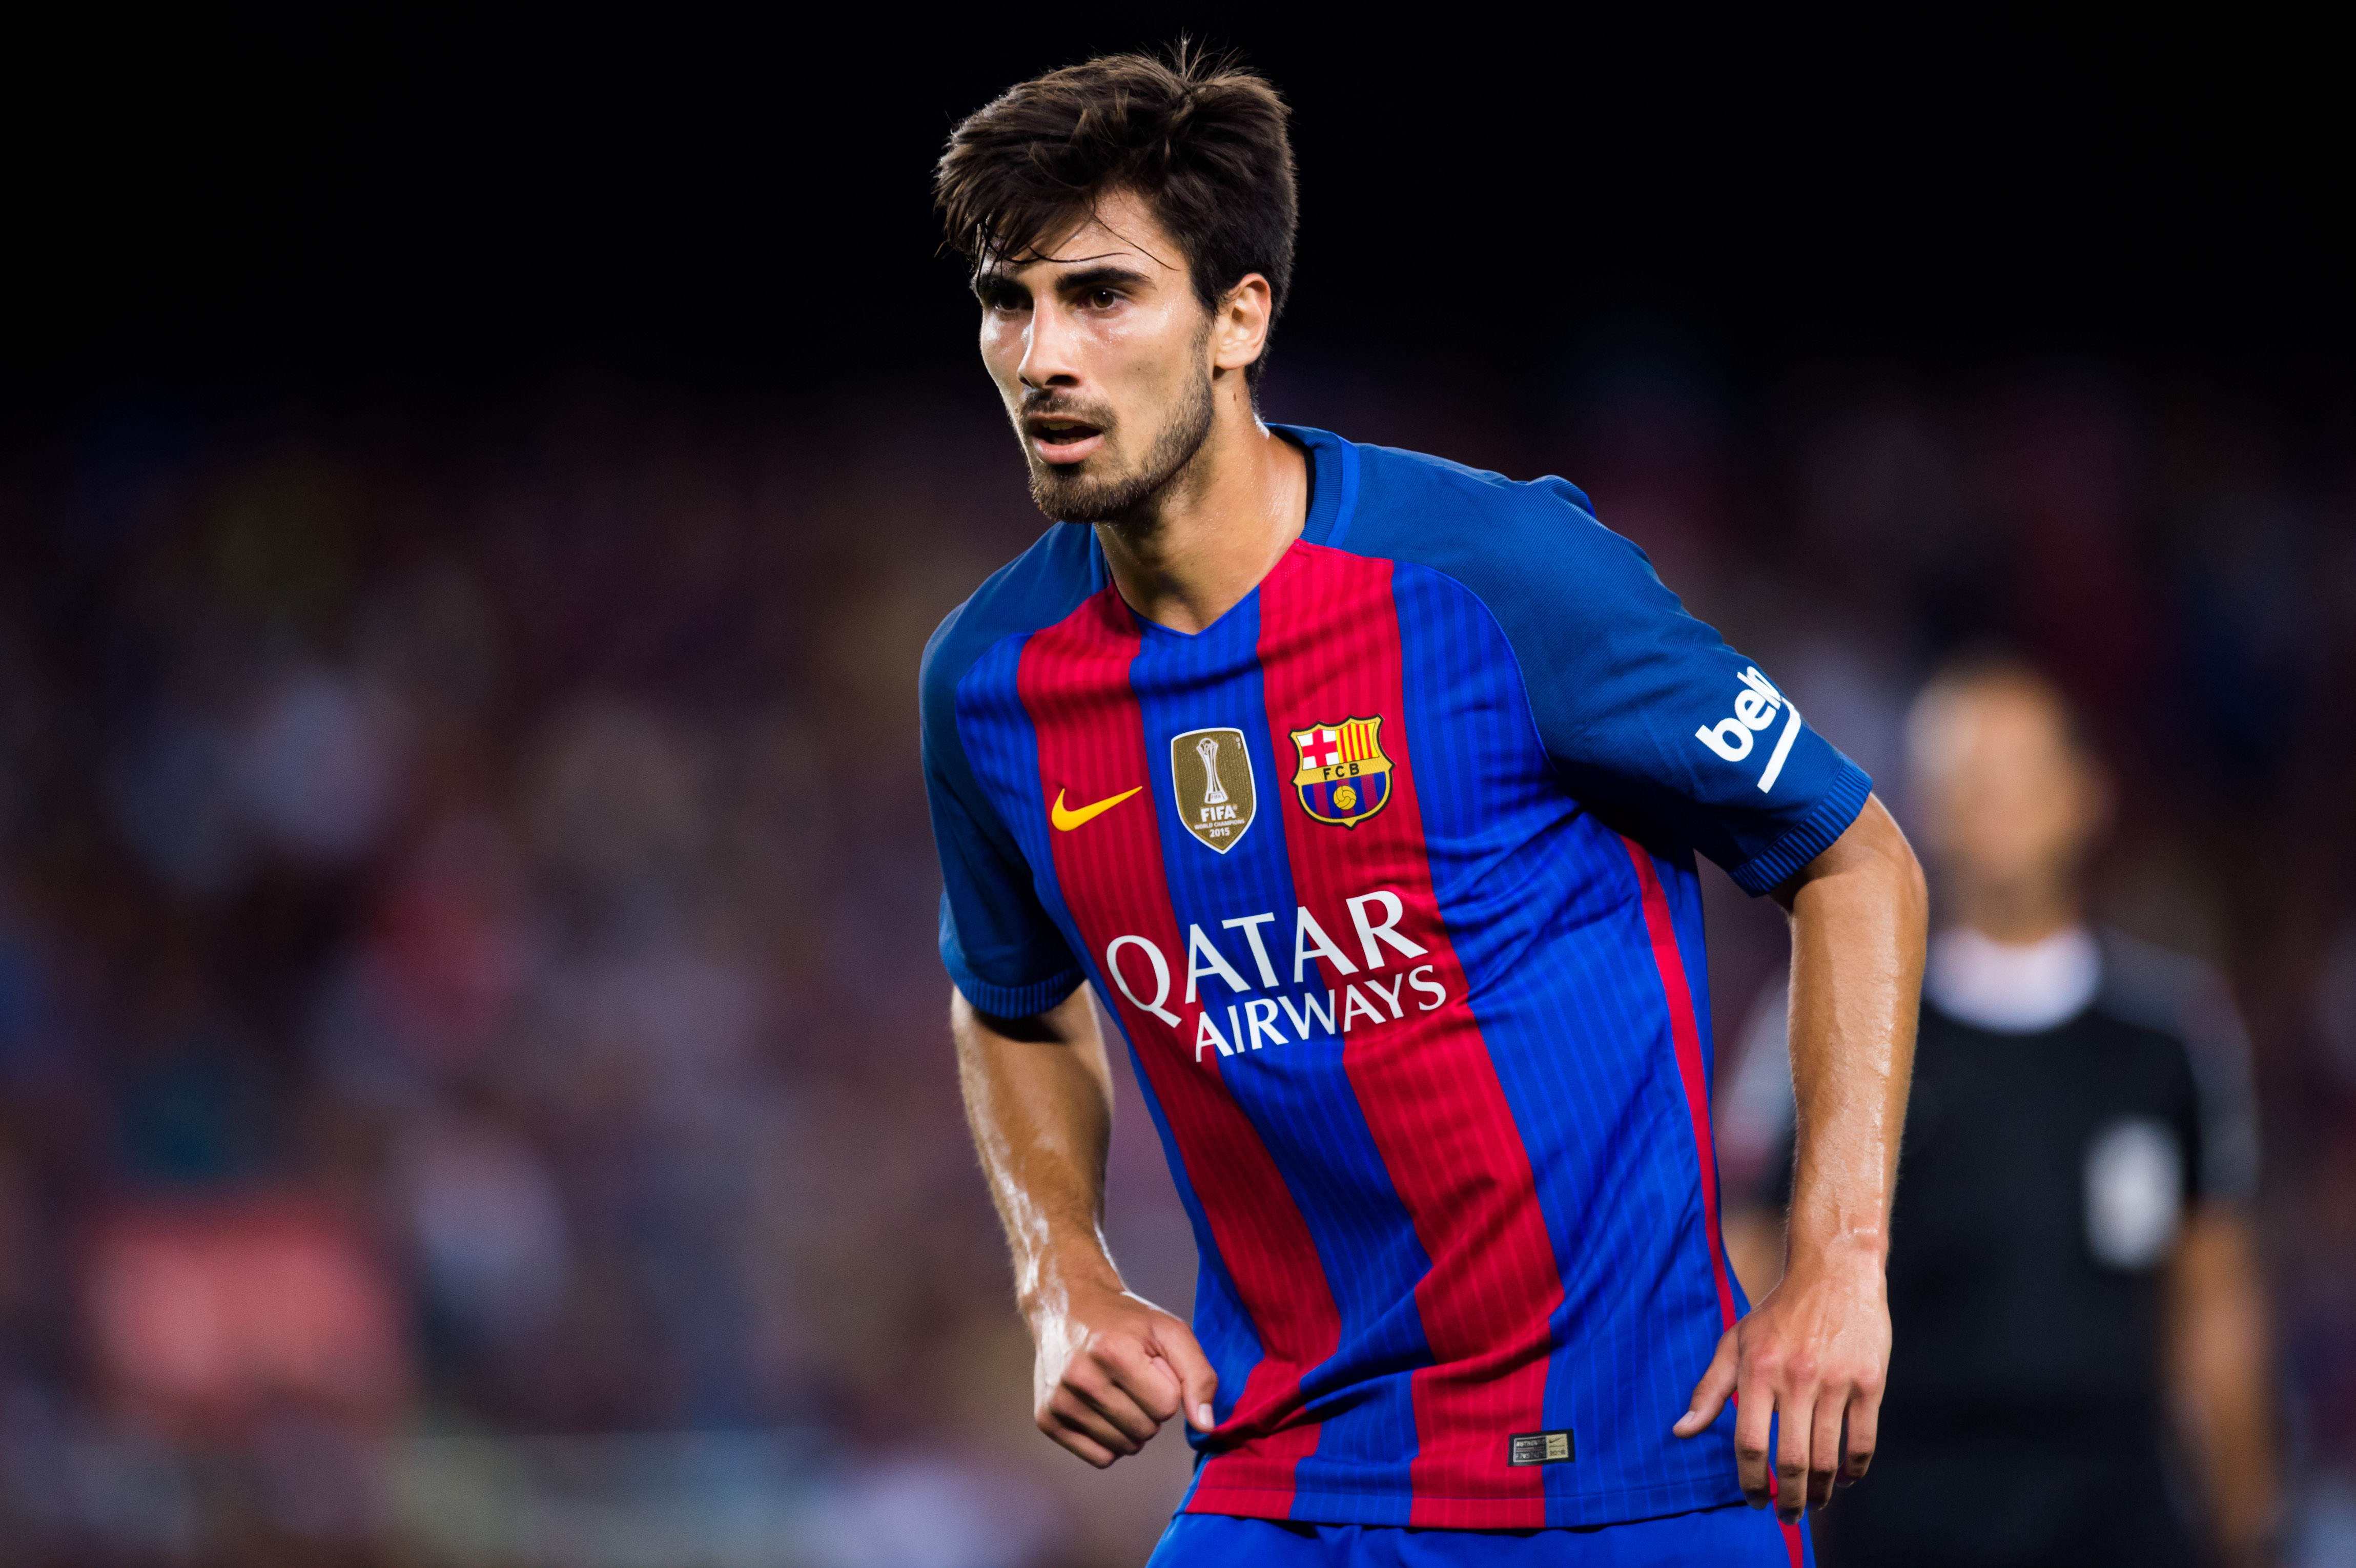 BARCELONA, SPAIN - AUGUST 10:  Andre Gomes of FC Barcelona looks on during the Joan Gamper trophy match between FC Barcelona and UC Sampdoria at Camp Nou on August 10, 2016 in Barcelona, Spain.  (Photo by Alex Caparros/Getty Images)